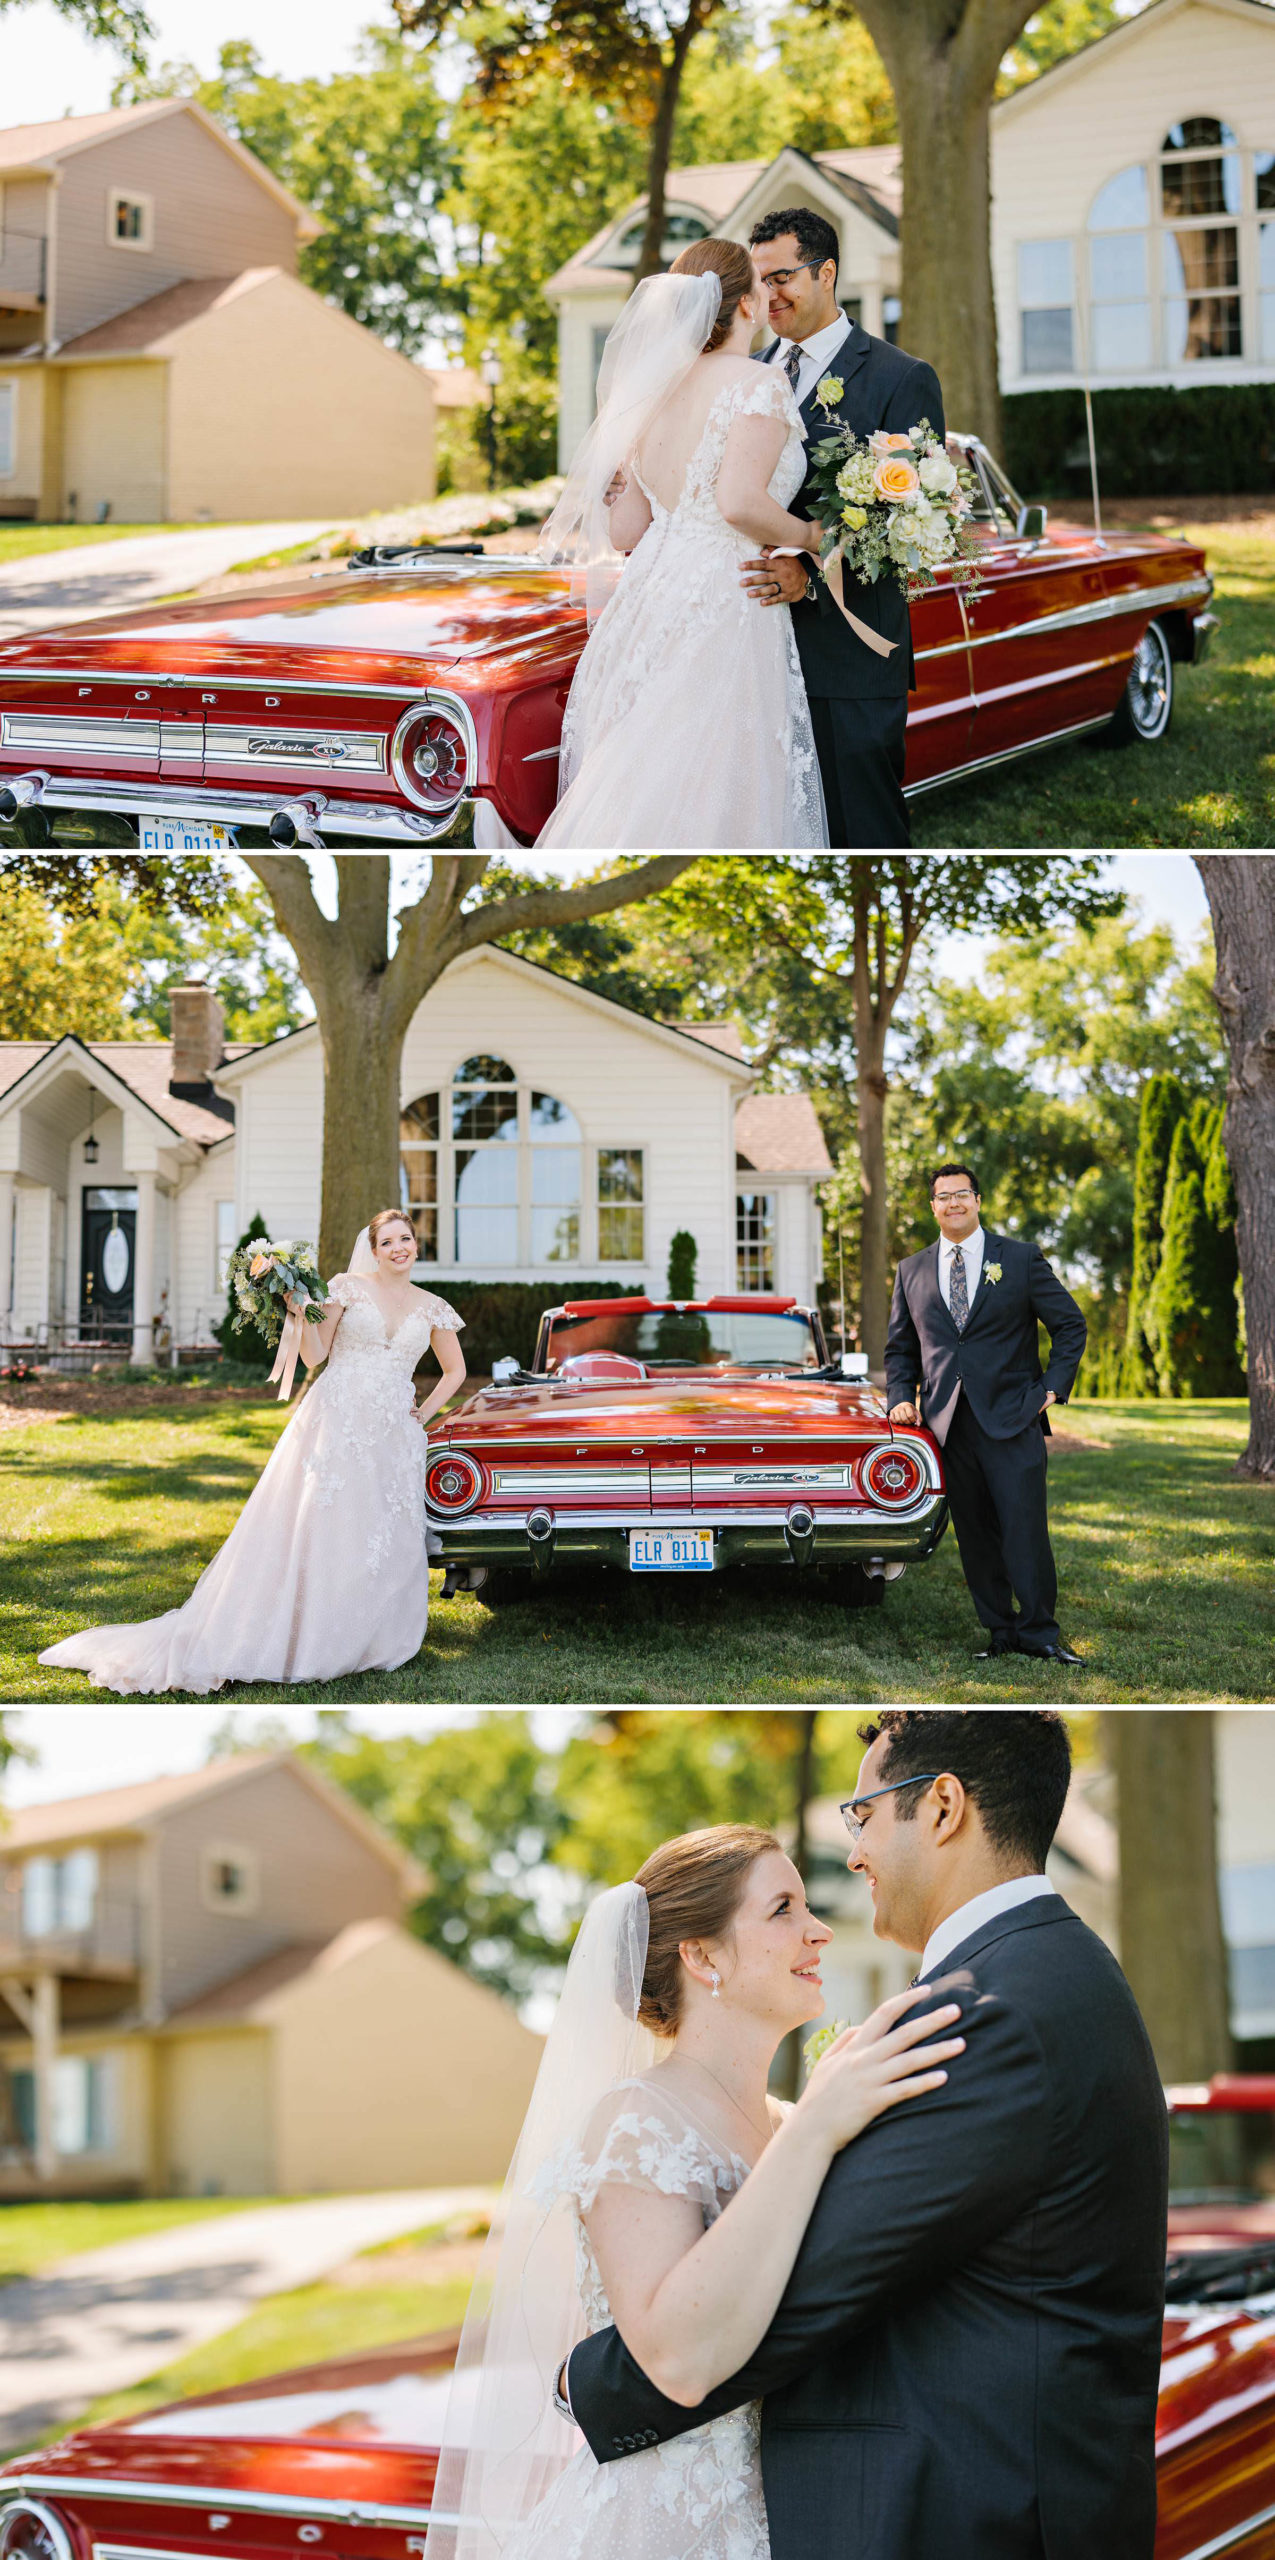 Bride and groom embrace in front of their getaway car; bride and groom pose with getaway car by Detroit Wedding Photographer Michele Maloney